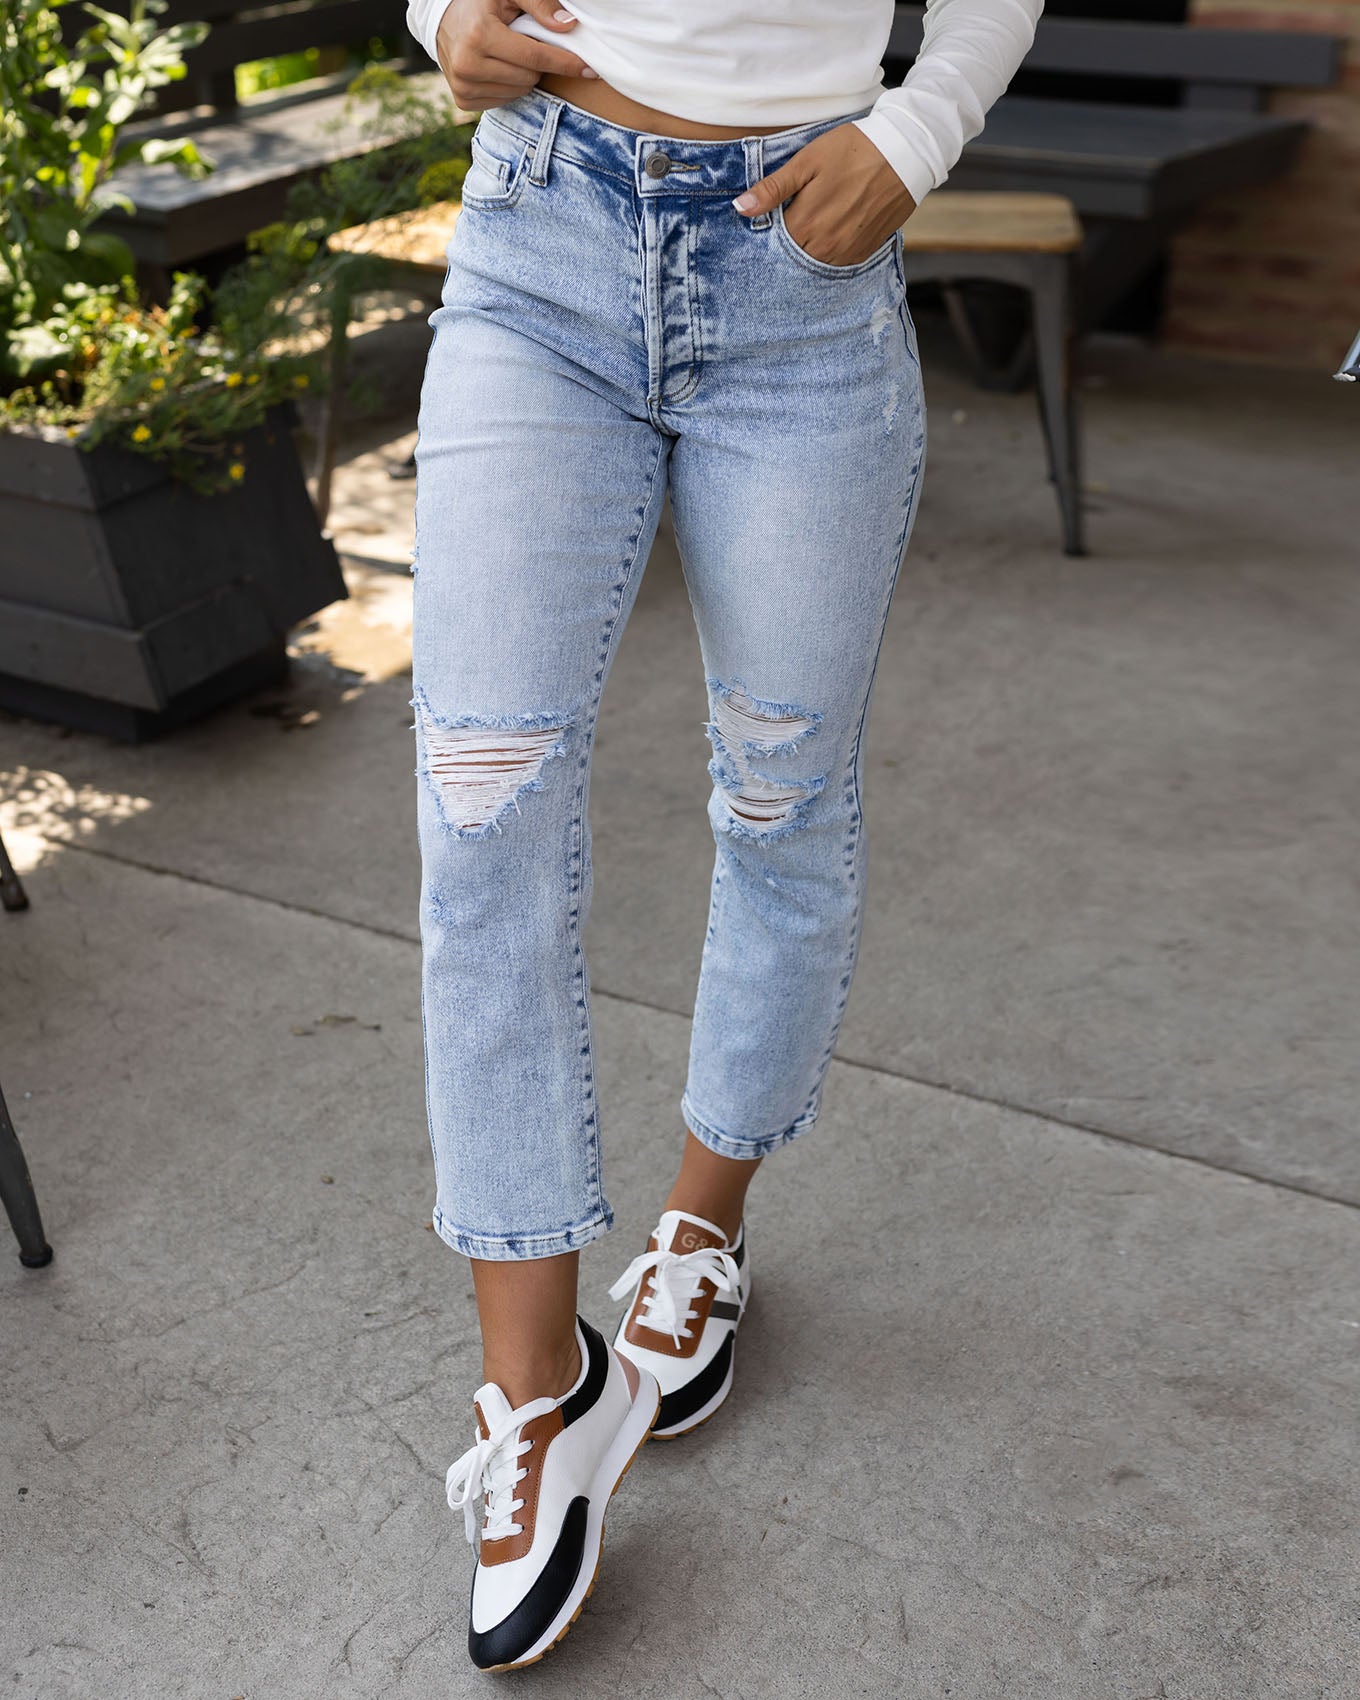 Premium Denim High Waisted Mom Jeans in Distressed Light Mid-Wash